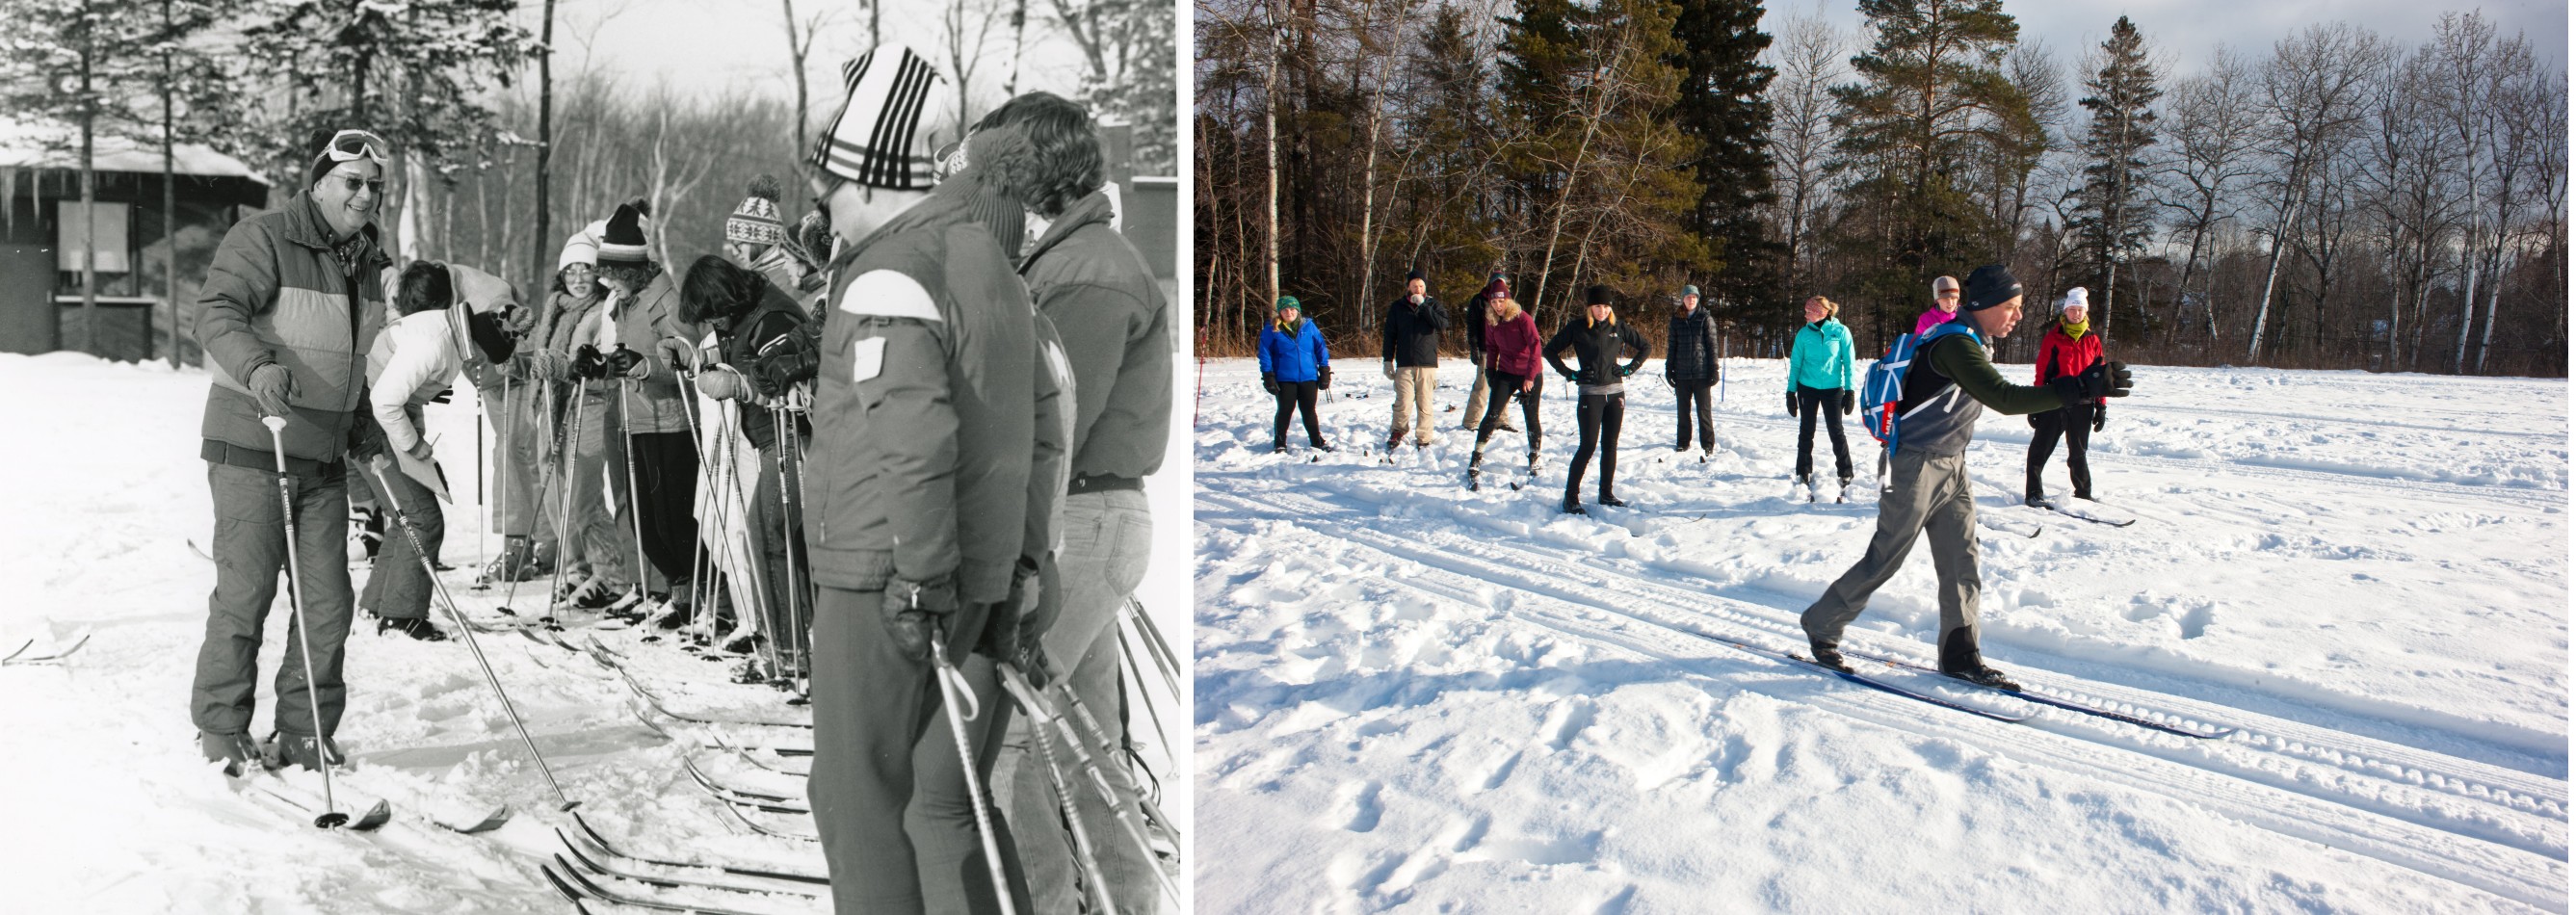 Two photos side by side of students cross country skiing, one in the 1950s and one in the present day.